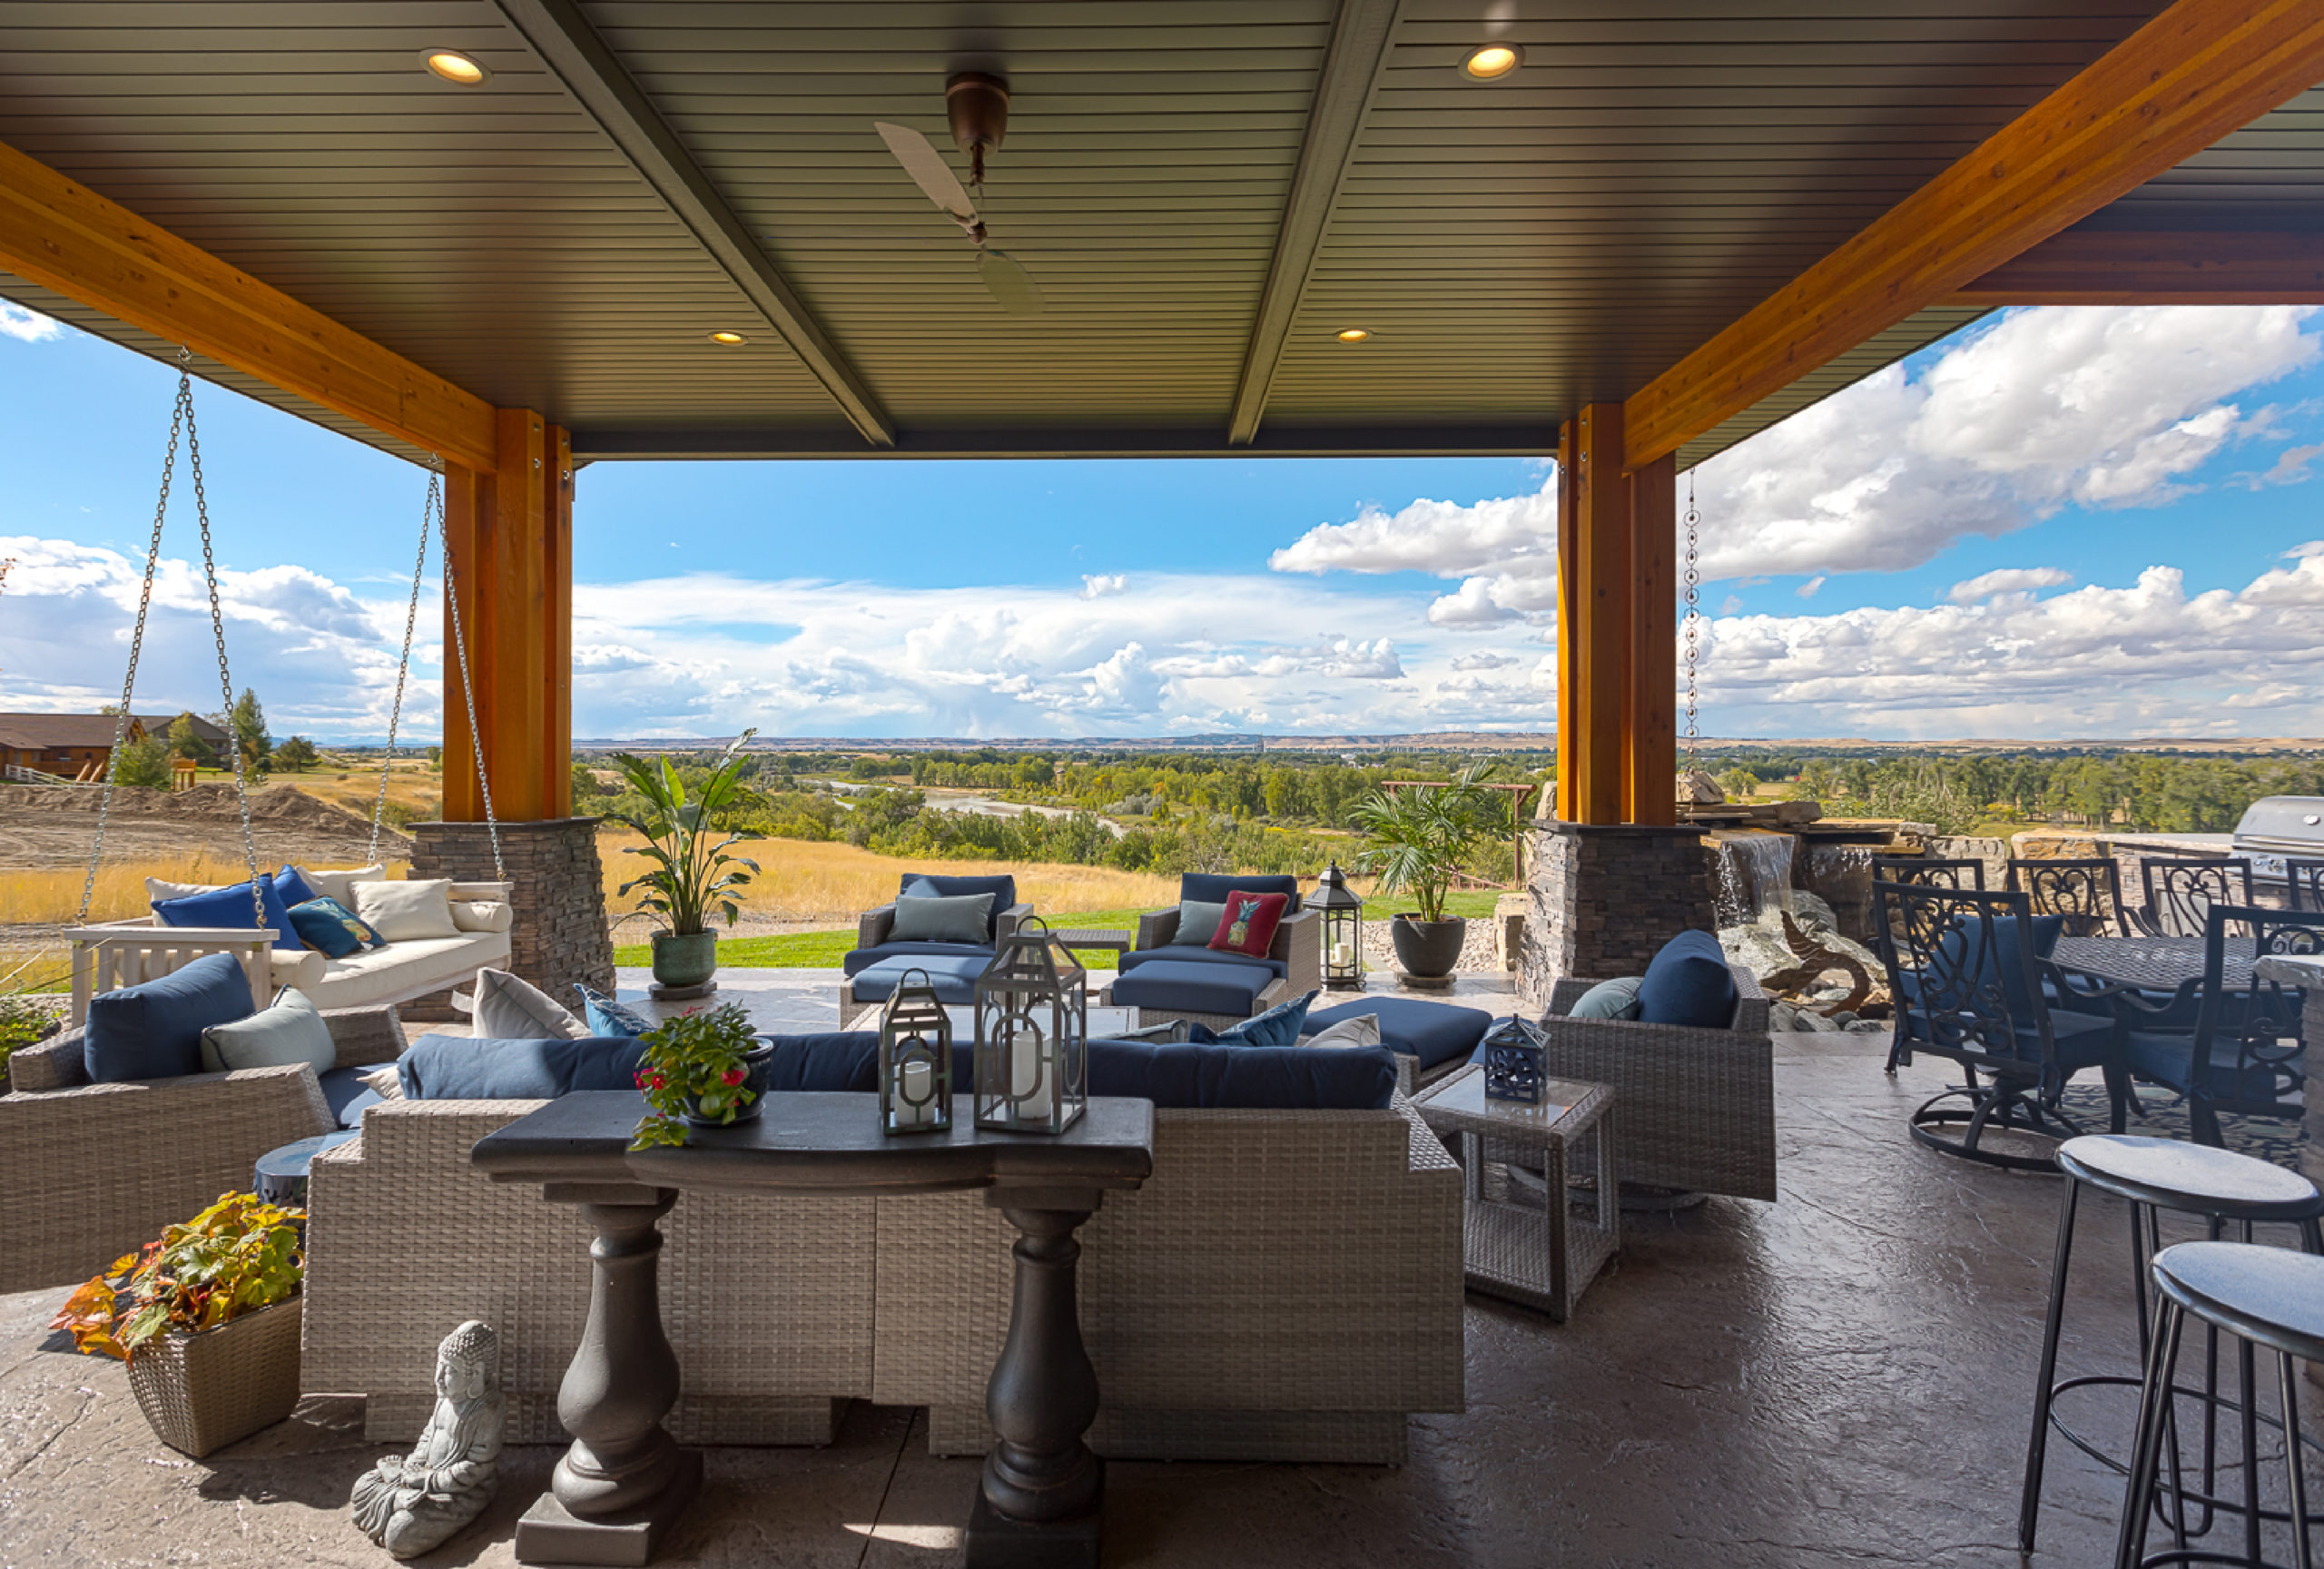 View of Billings Montana from outdoor patio designed by Ban Construction